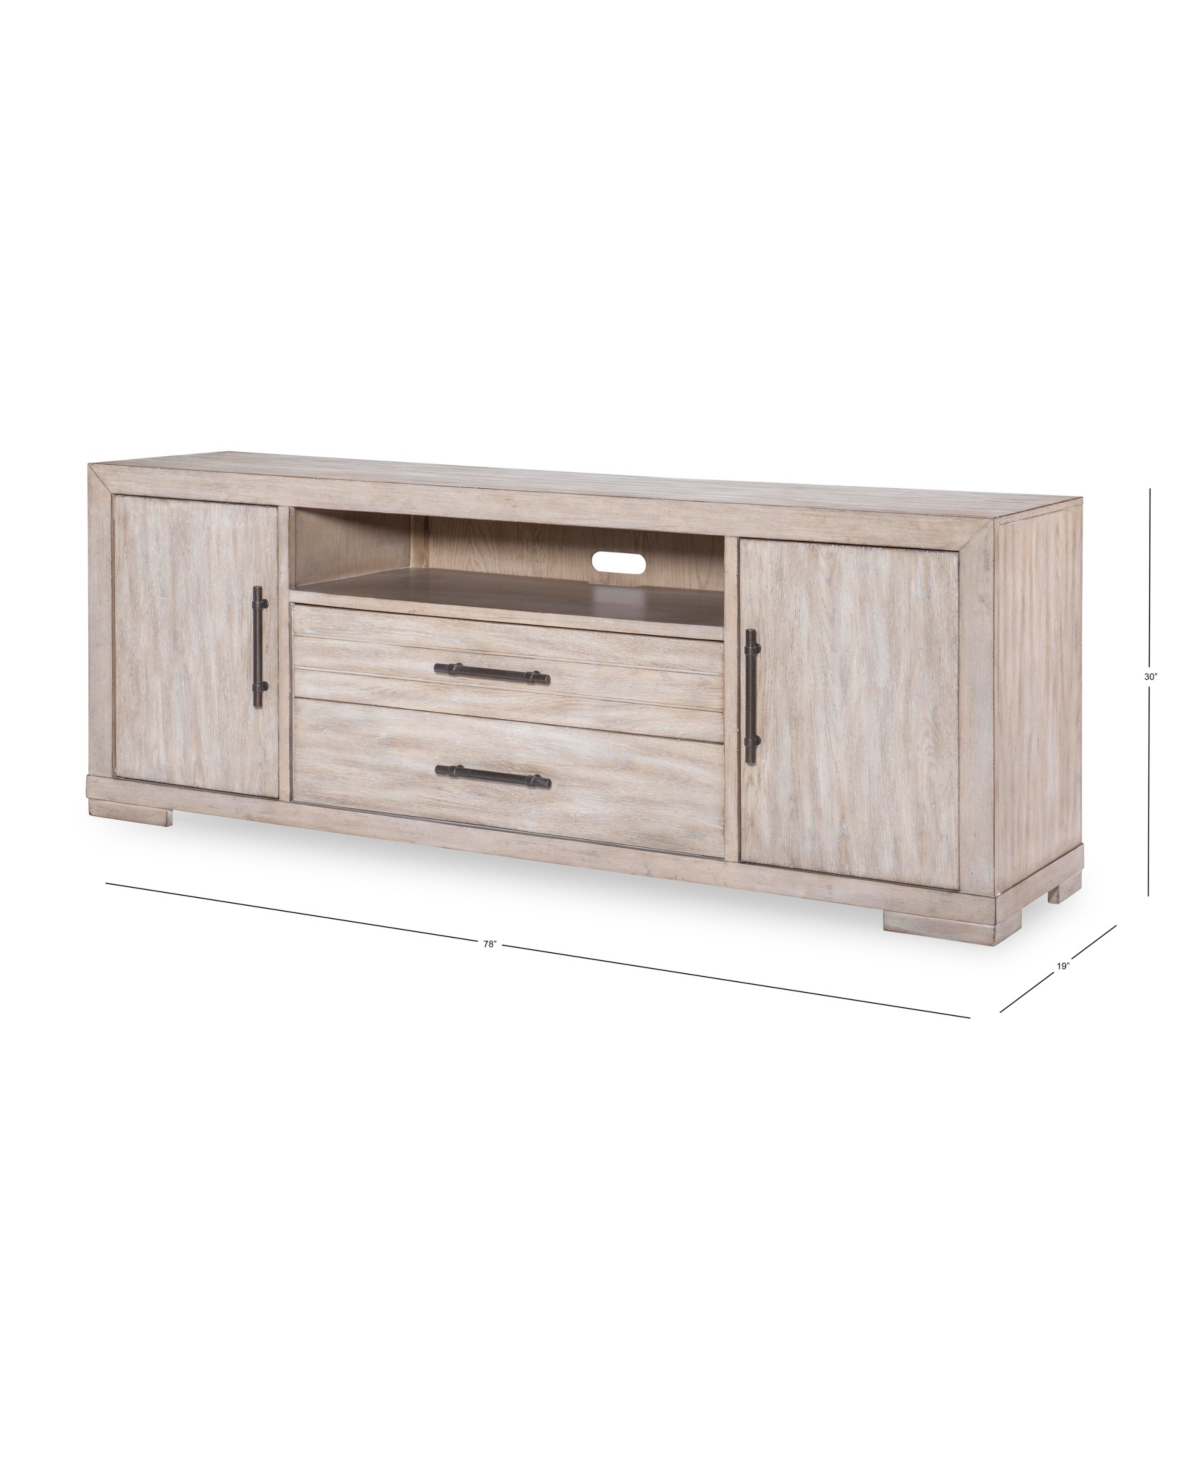 Furniture Westwood Entertainment Console In Weathered Oak